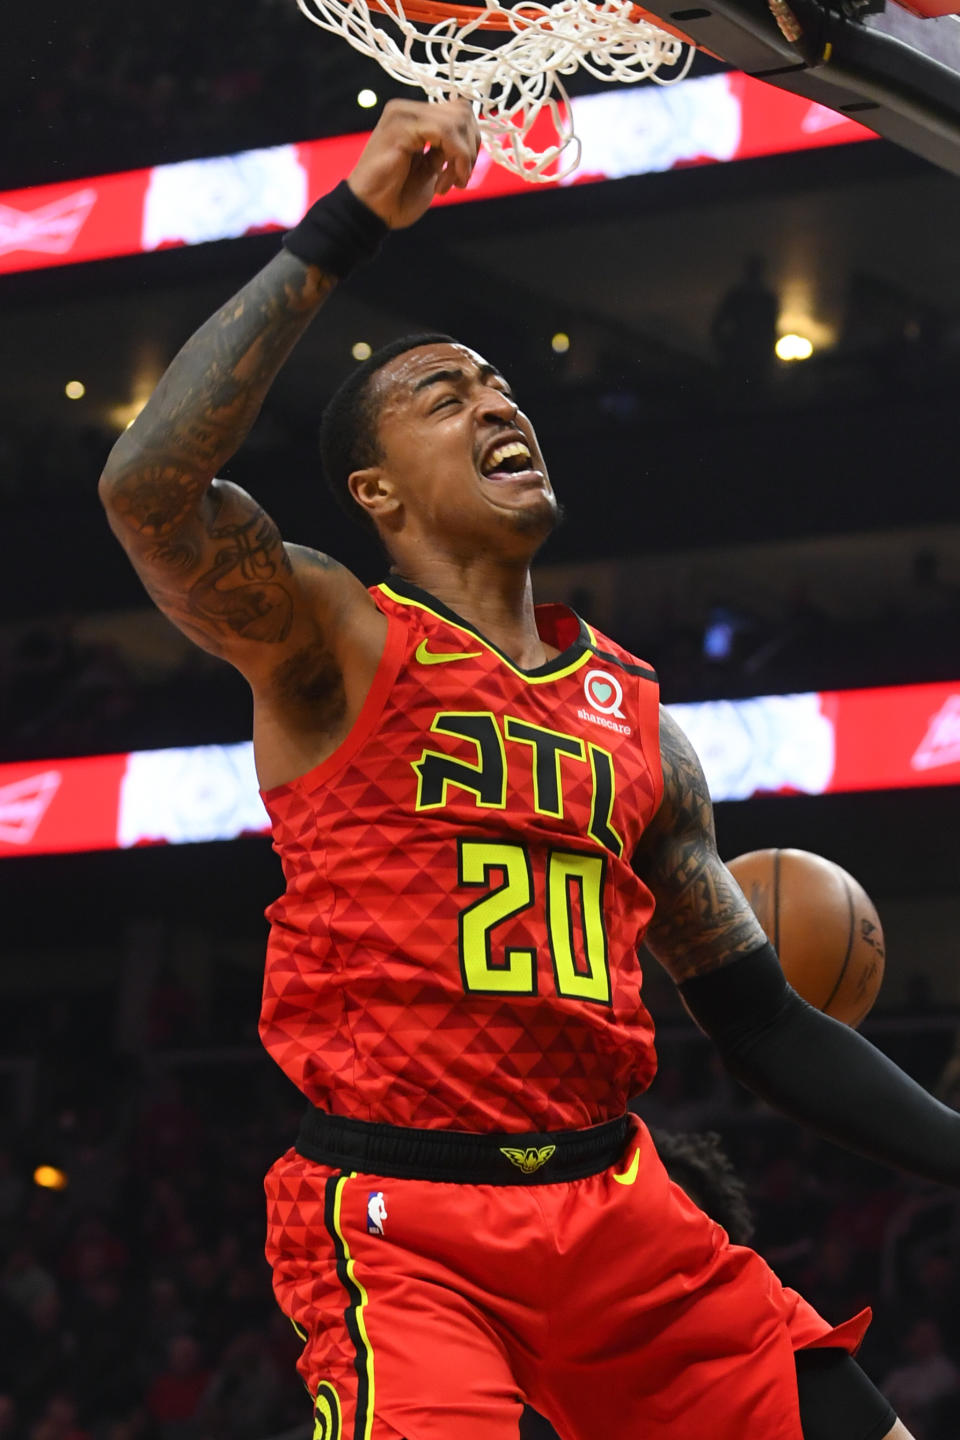 Atlanta Hawks forward John Collins comes down from a dunk during the first half of an NBA basketball game against the Houston Rockets, Wednesday, Jan. 8, 2020, in Atlanta. (AP Photo/John Amis)